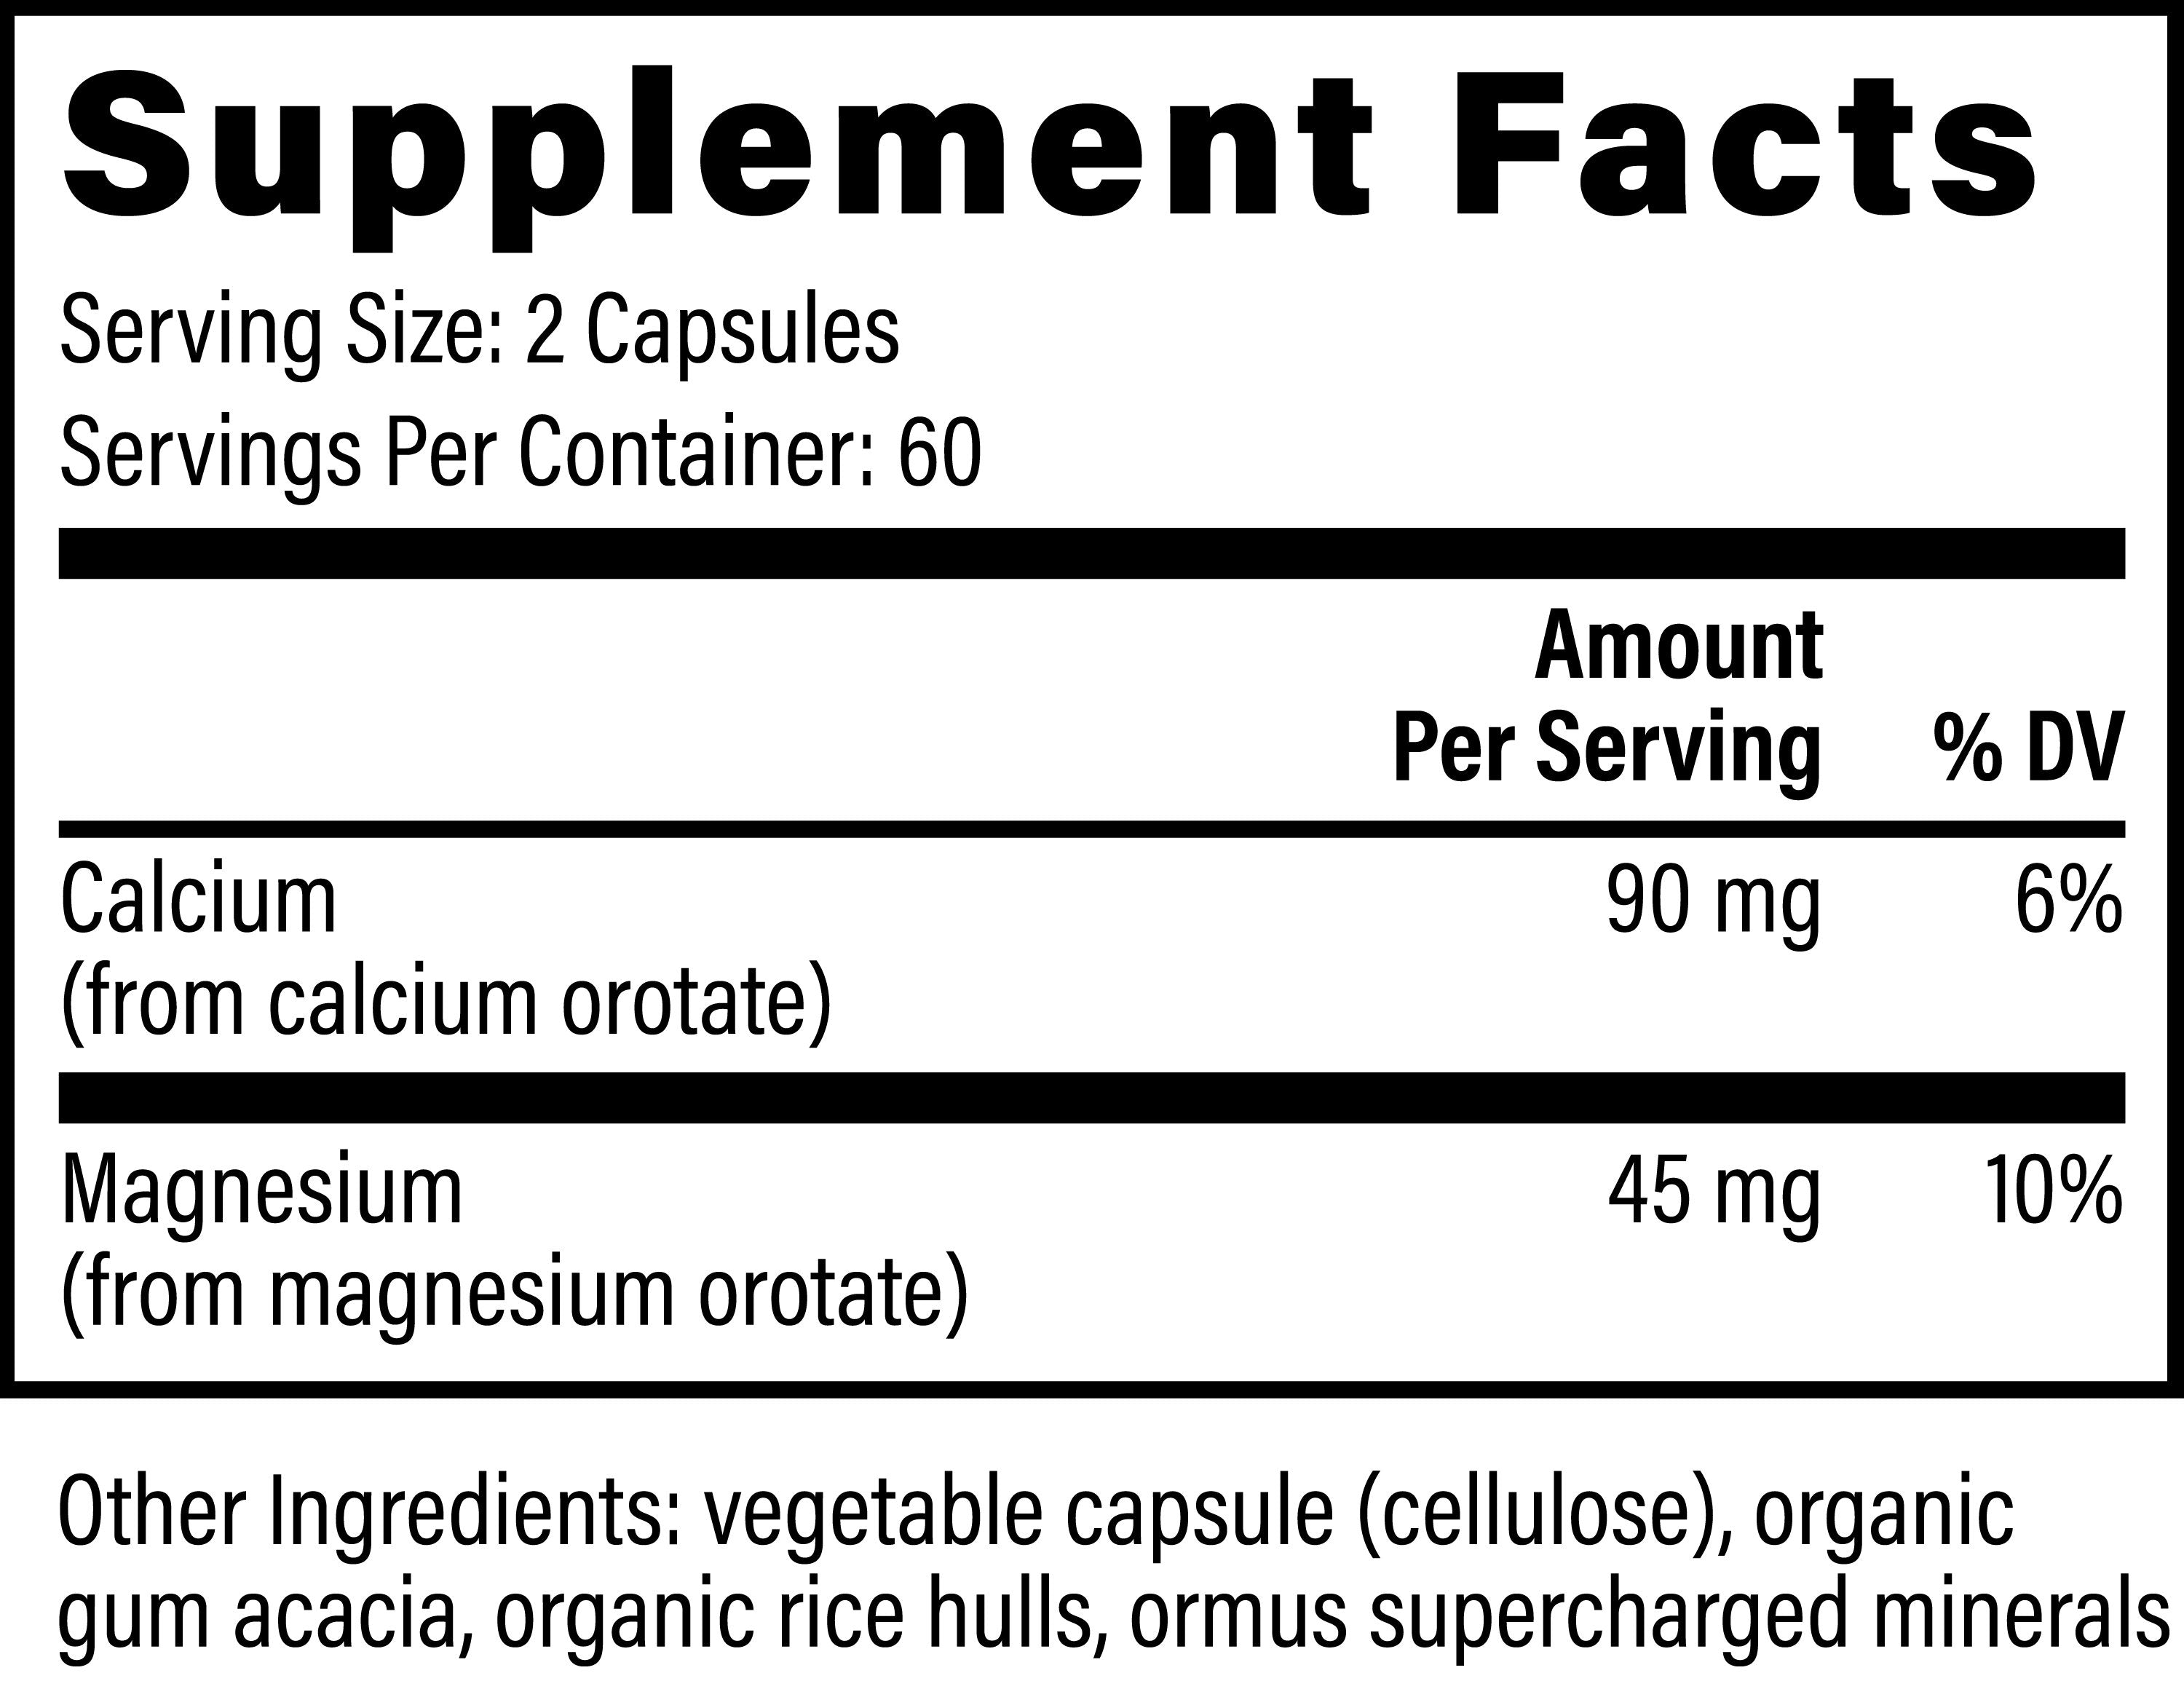 Global Healing Calcium and Magnesium  Orotate 120 Capsules Bottle Supplement Facts